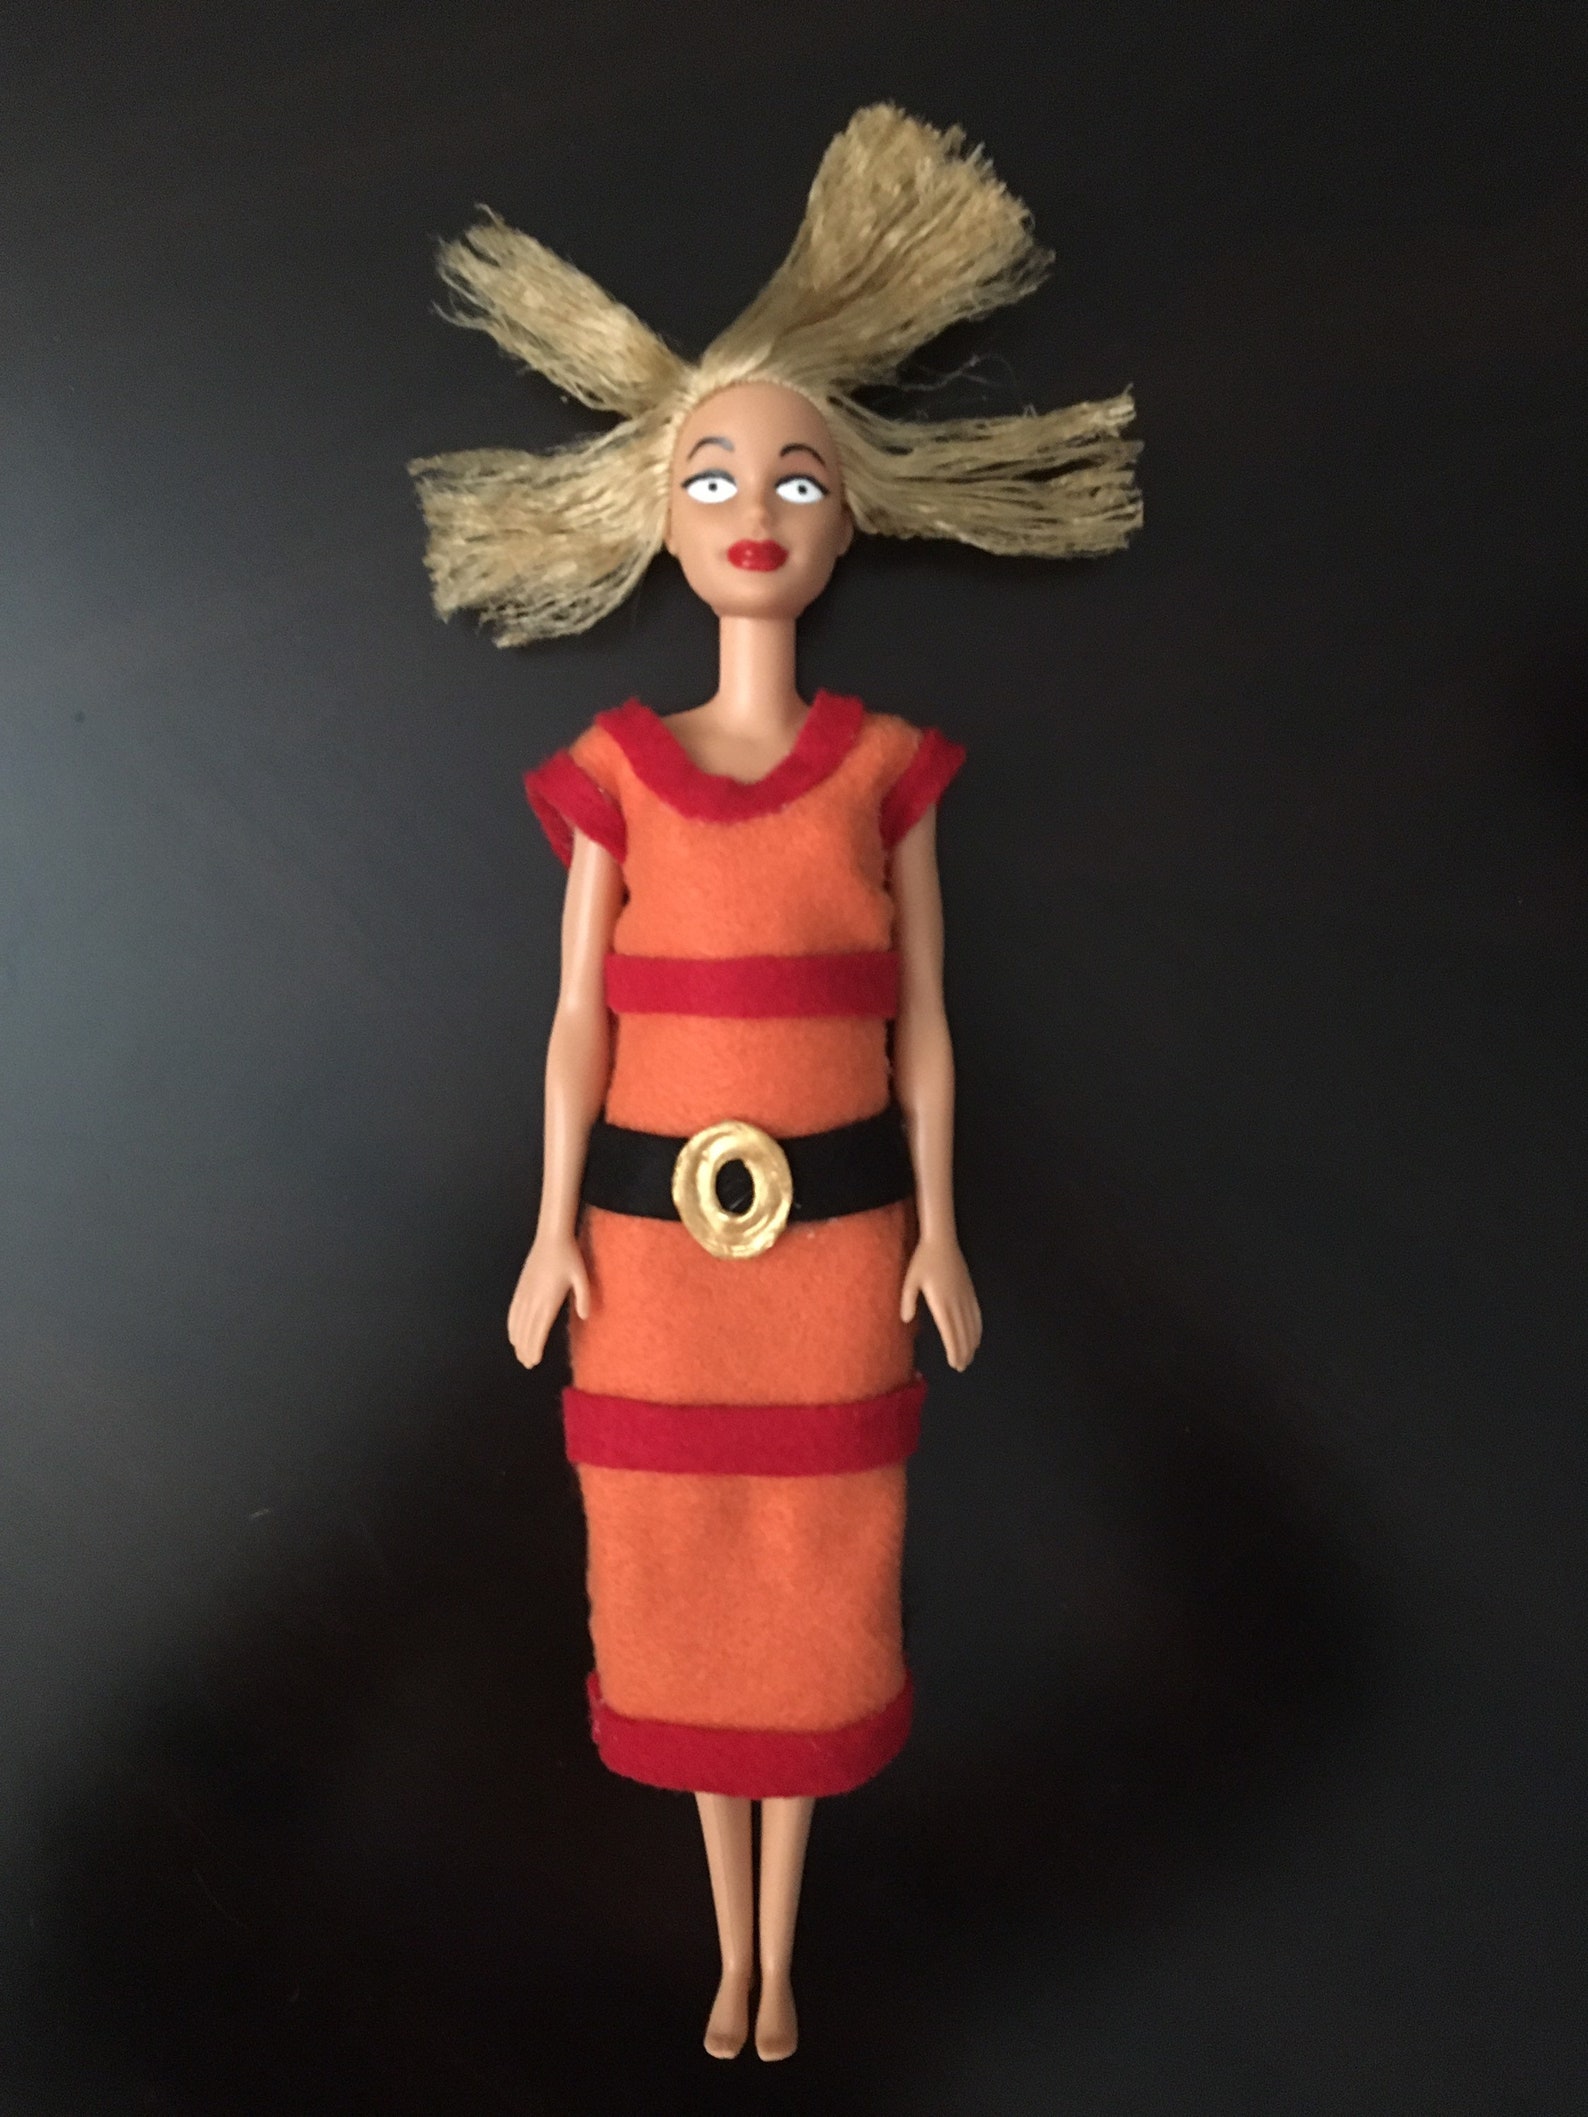 Cynthia Doll From Rugrats - Etsy